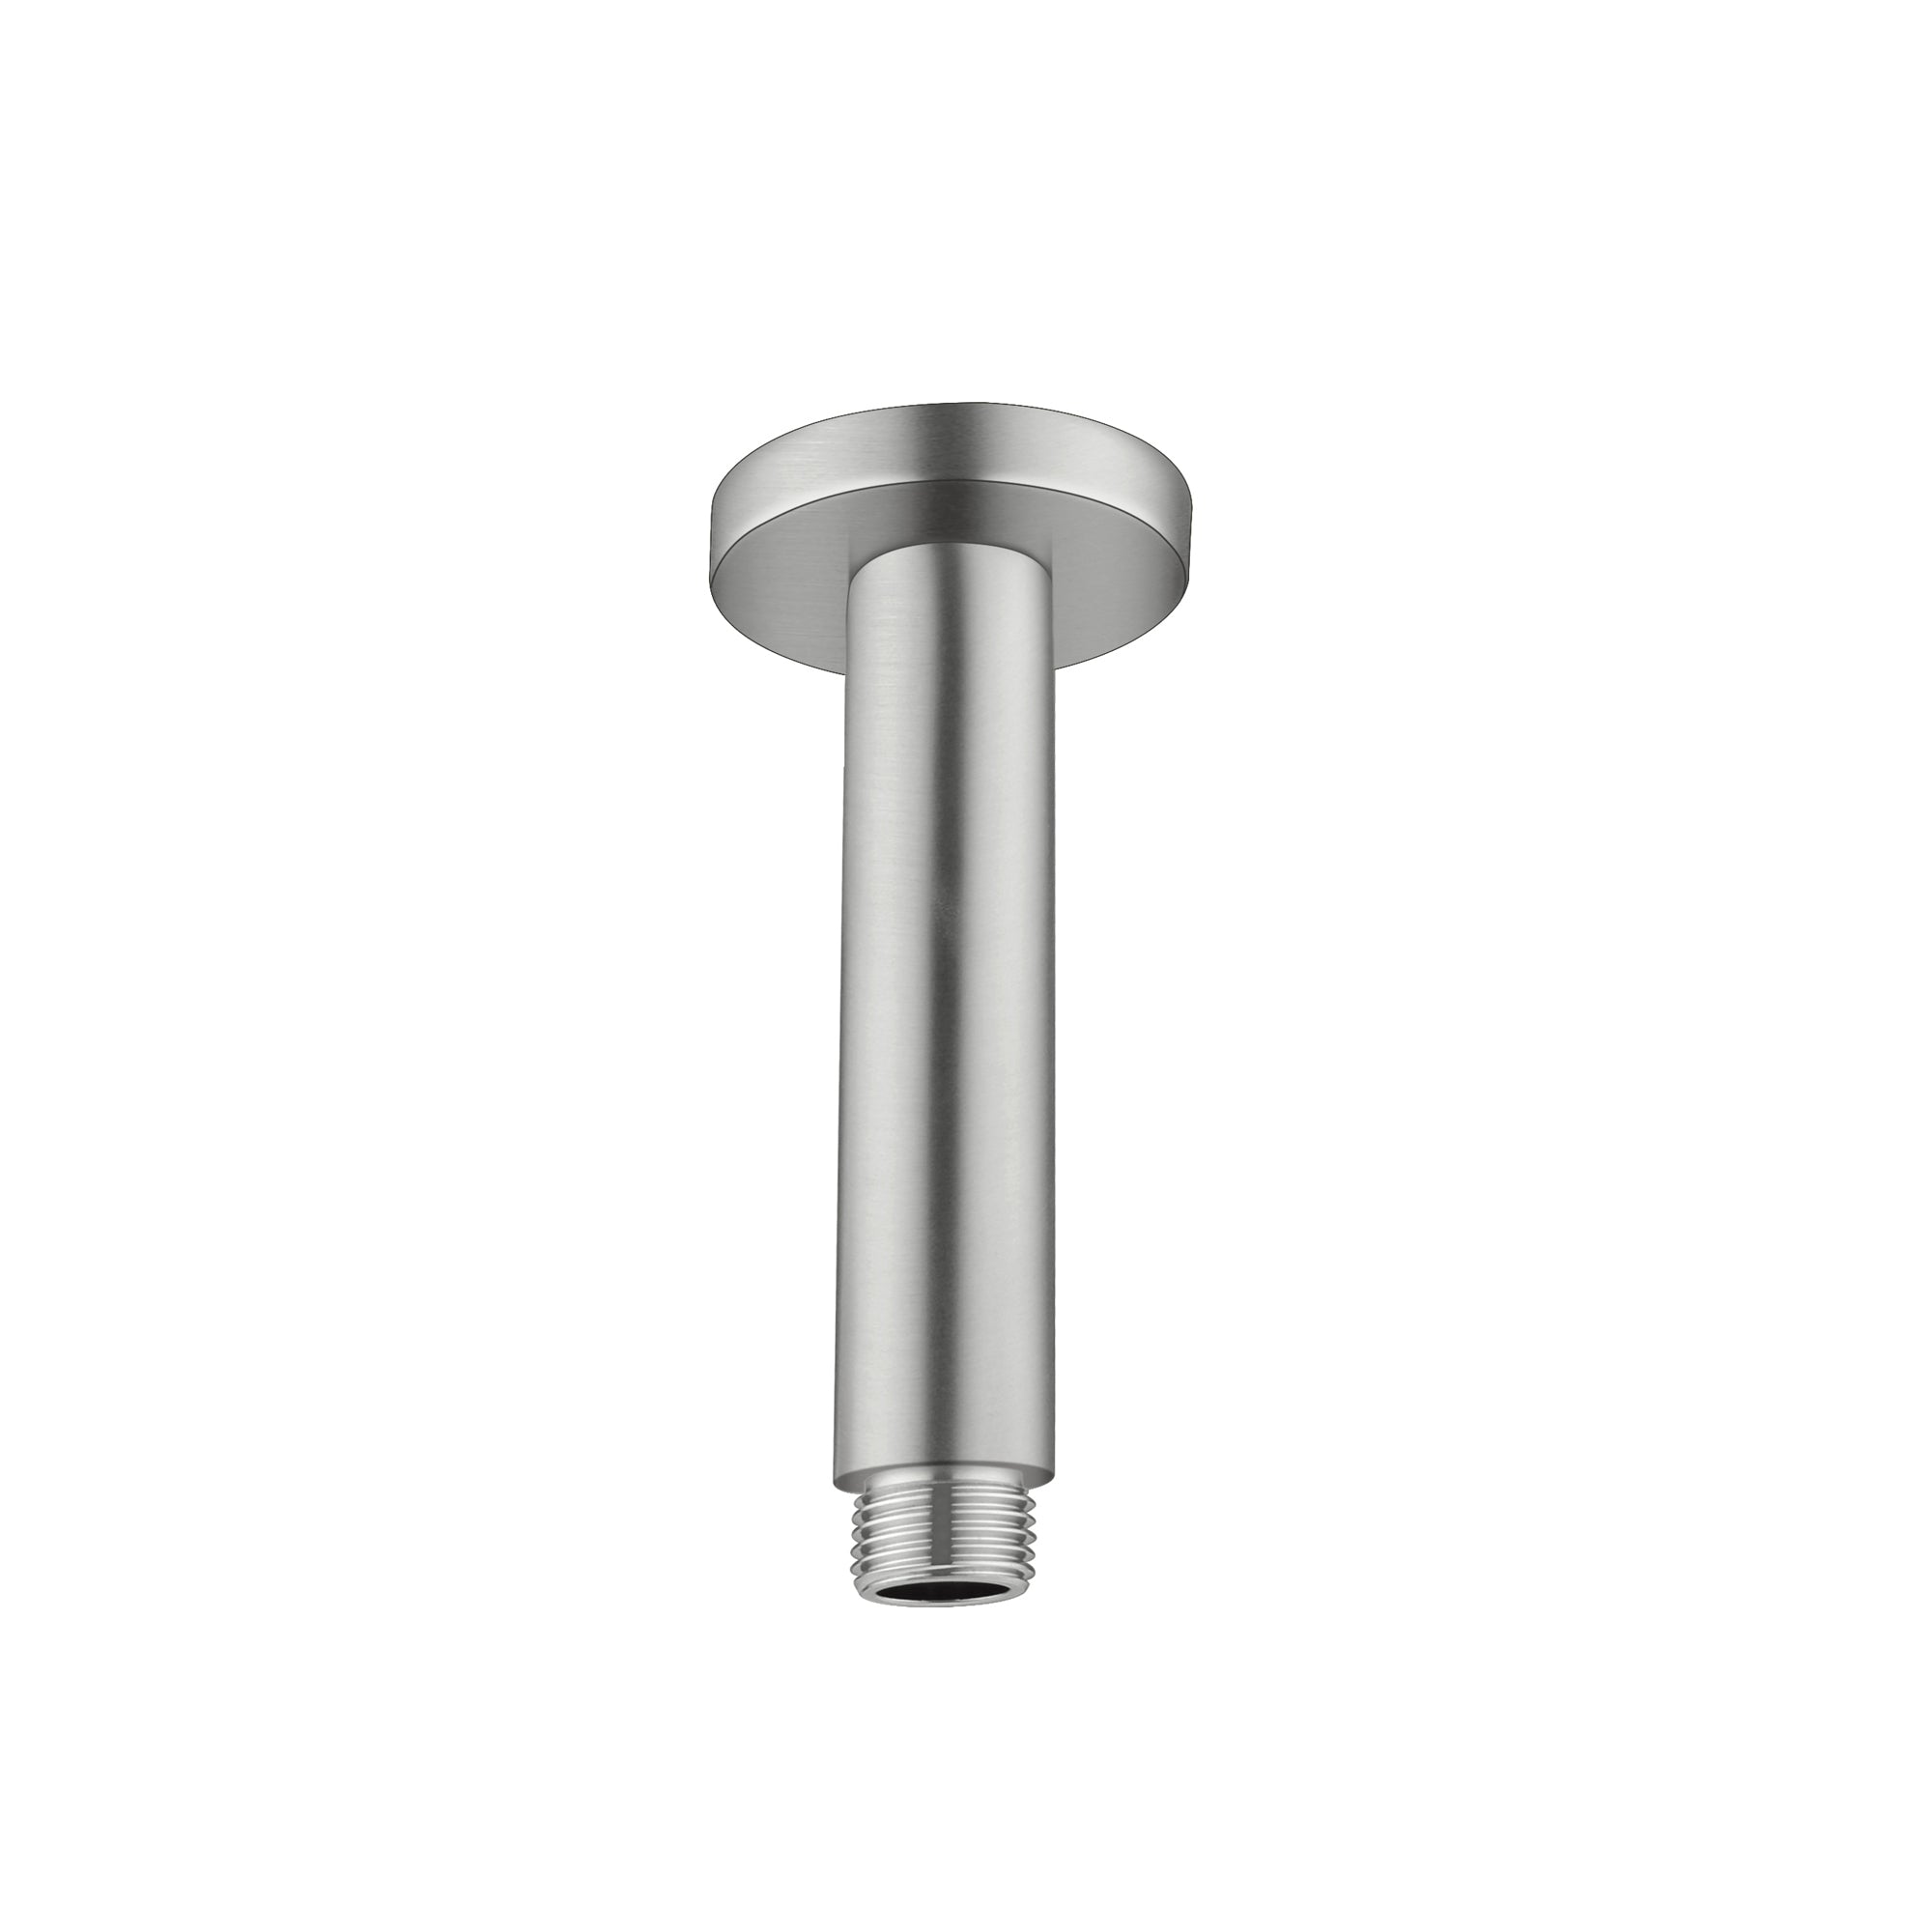 ROUND CEILING ARM 100MM LENGTH BRUSHED NICKEL